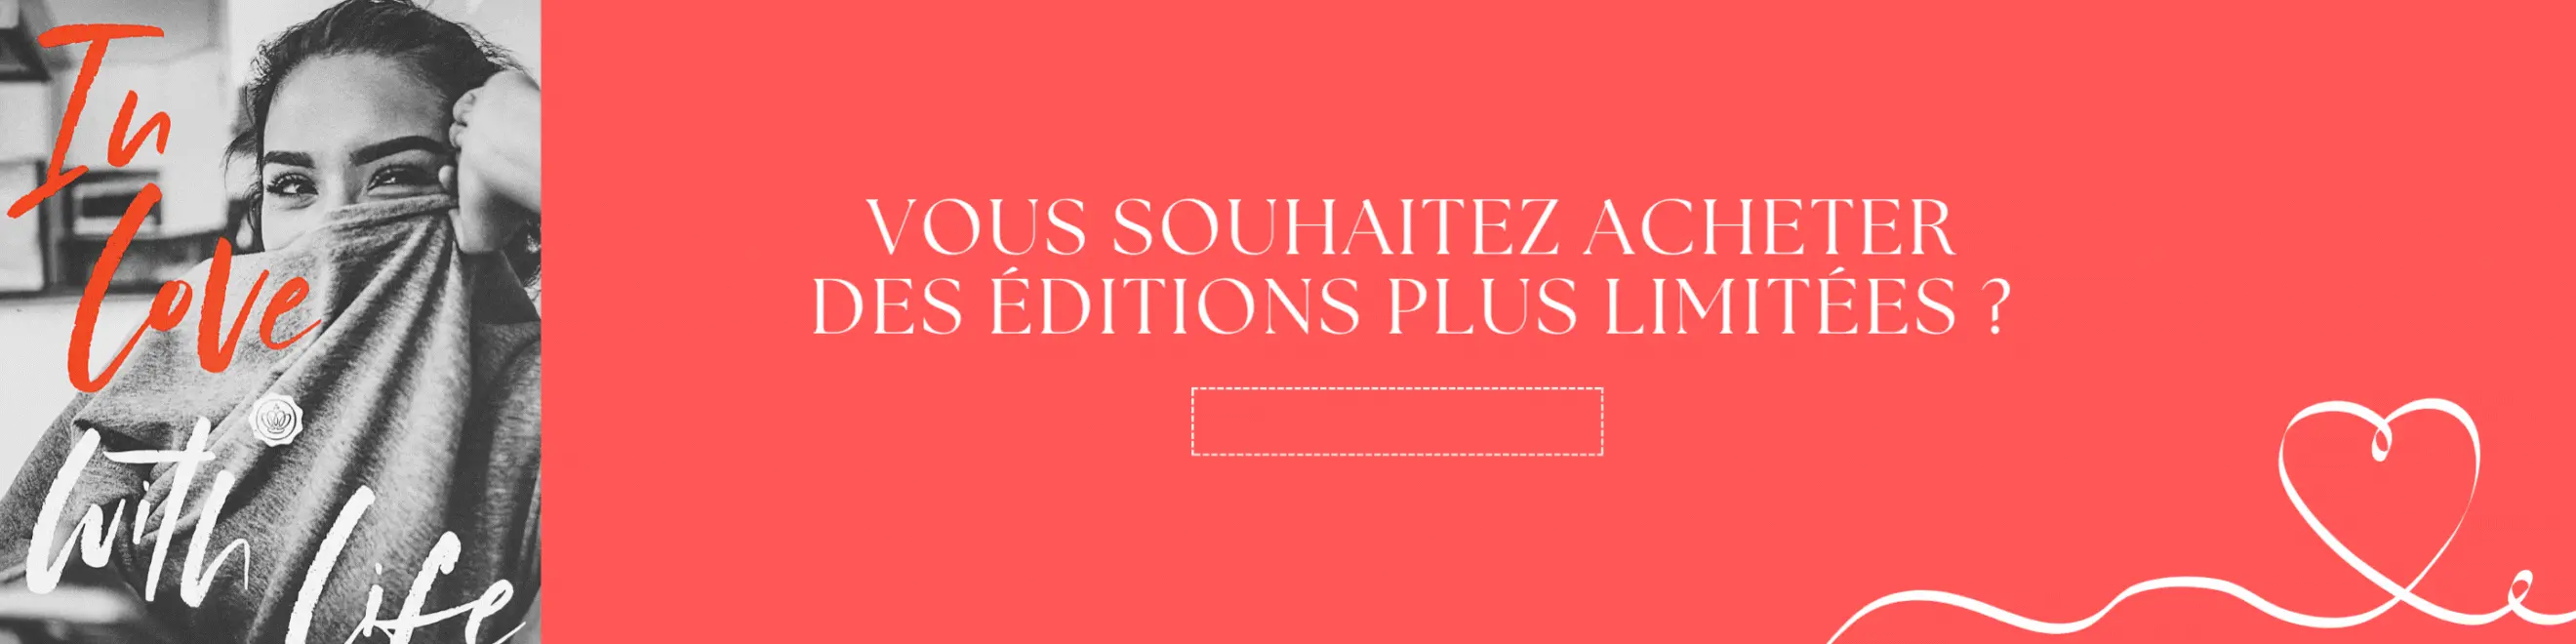 In love with life animated banner with Text saying Vous souhaitez acheter des éditions plus limitées? with a click through to limited edition boxes list page